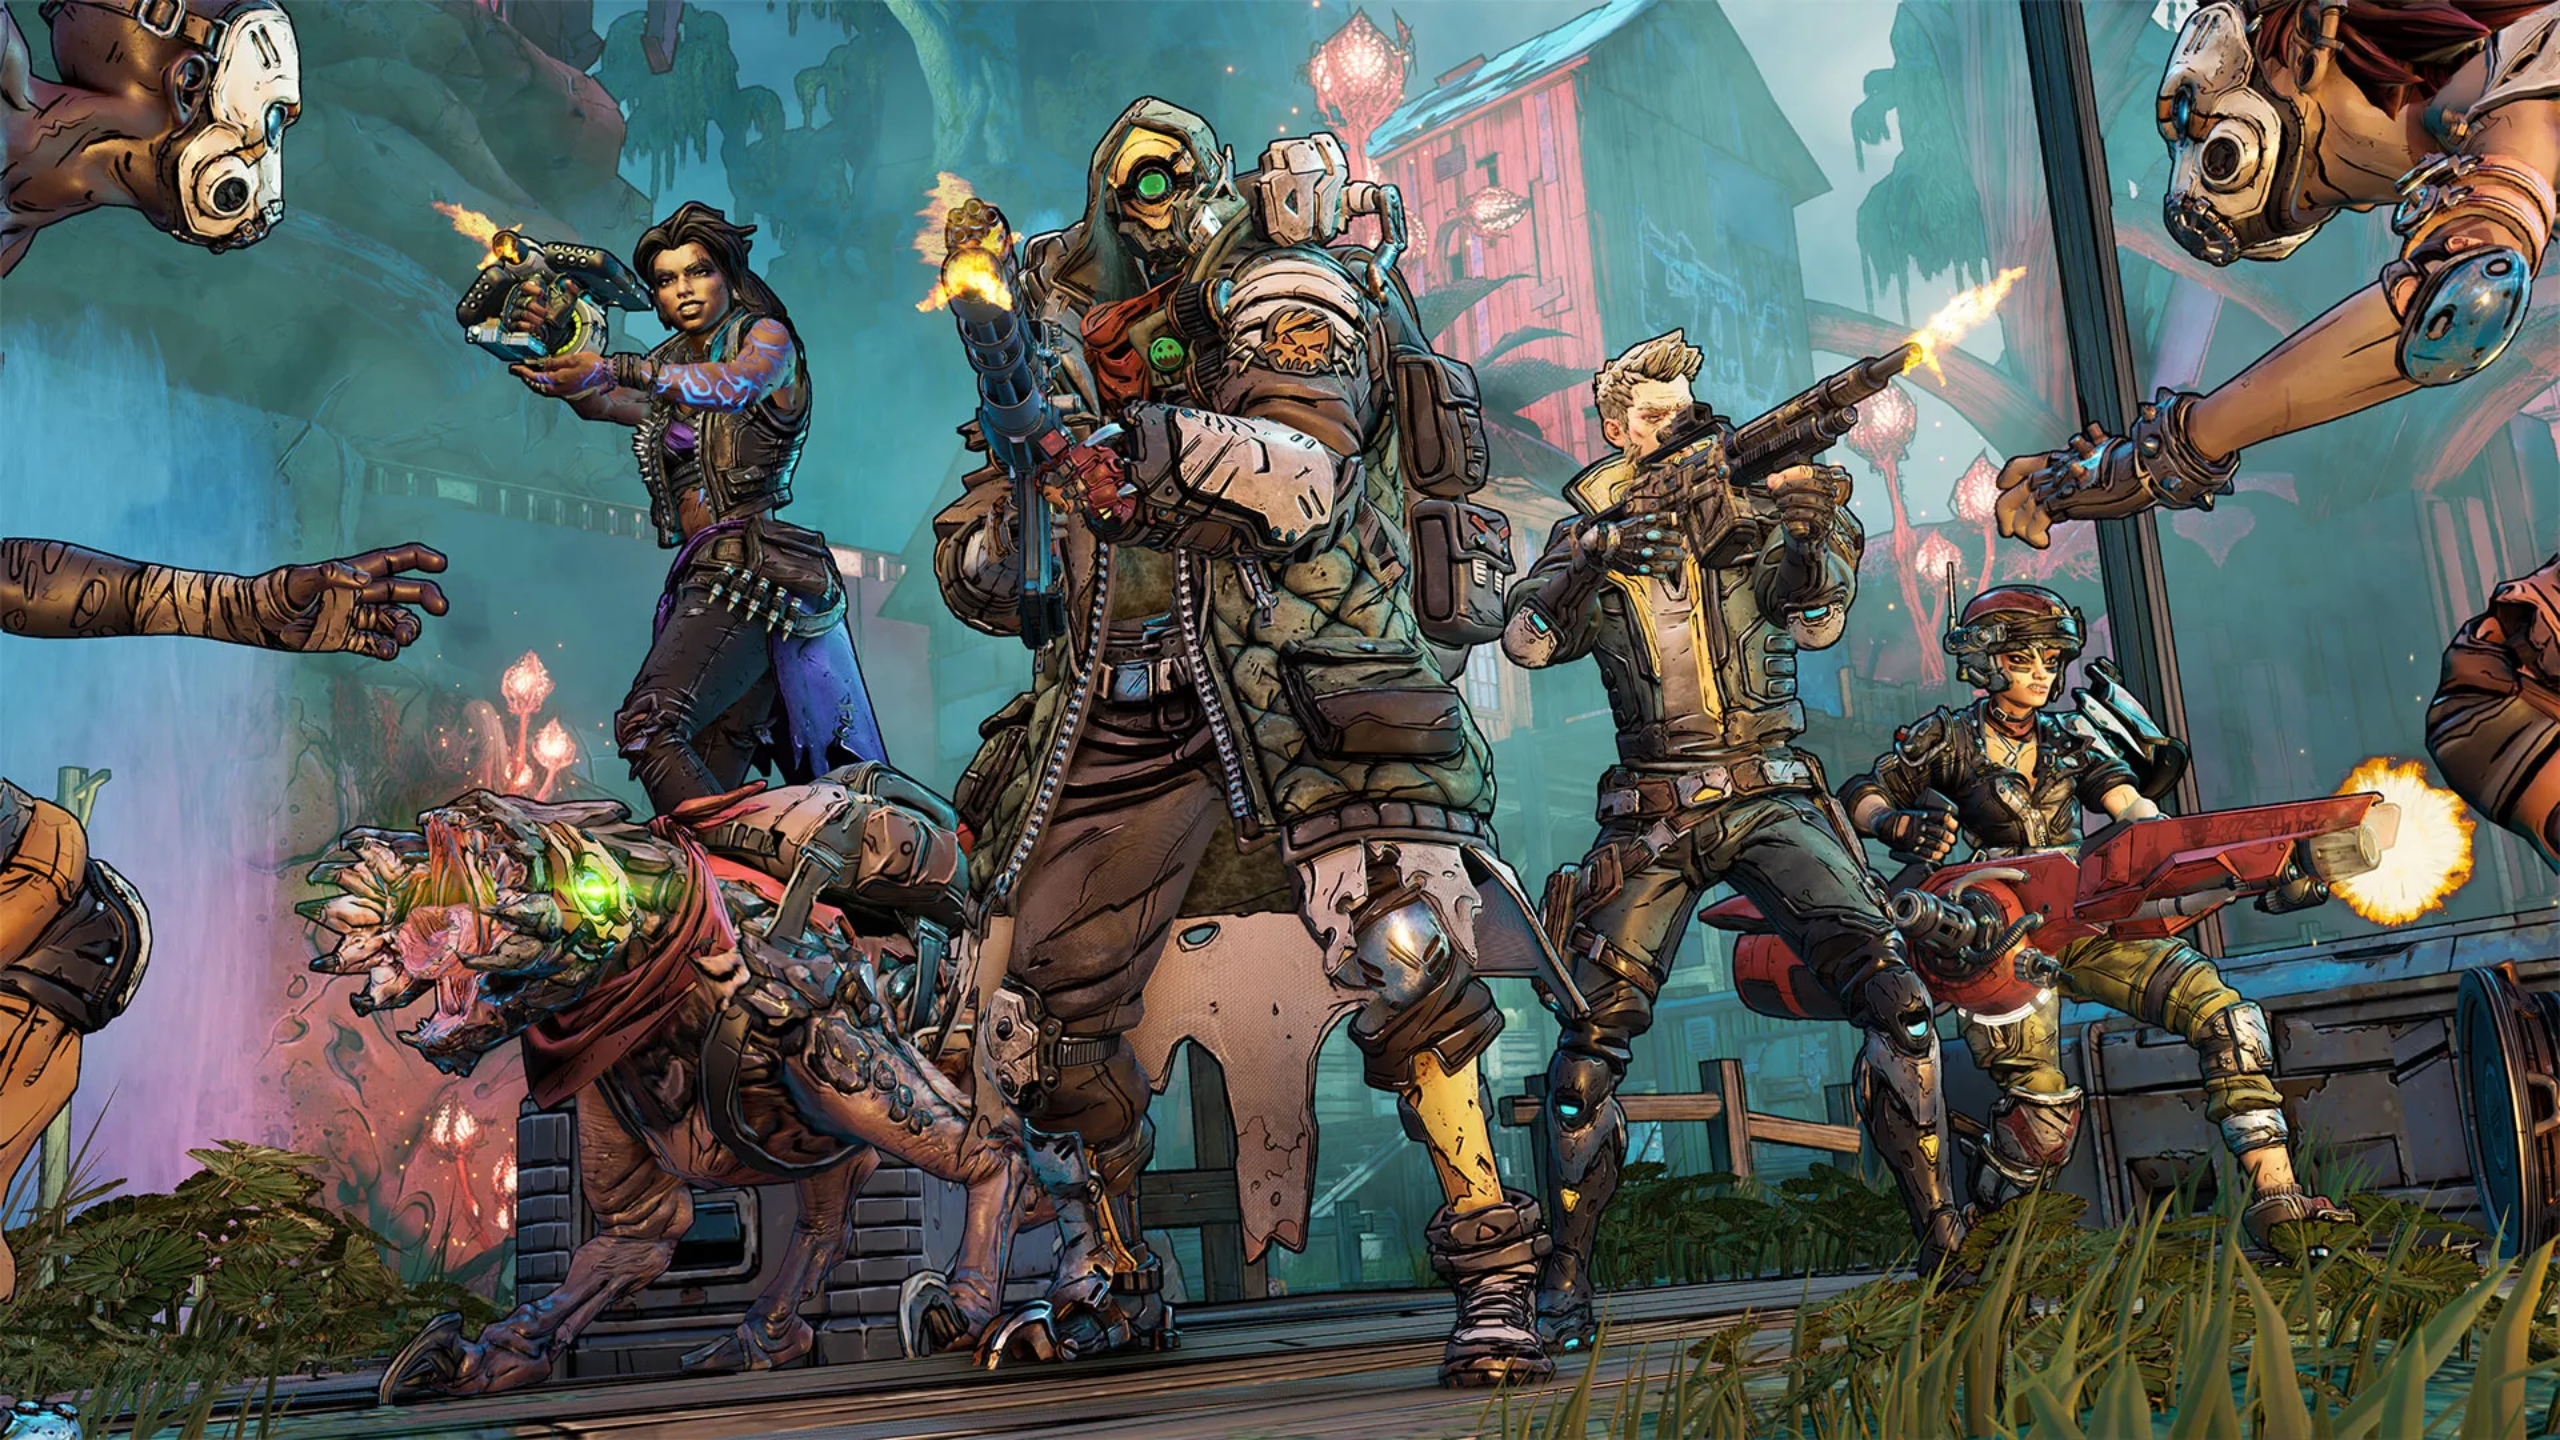 A group of gun-wielding characters band together in Borderlands 3